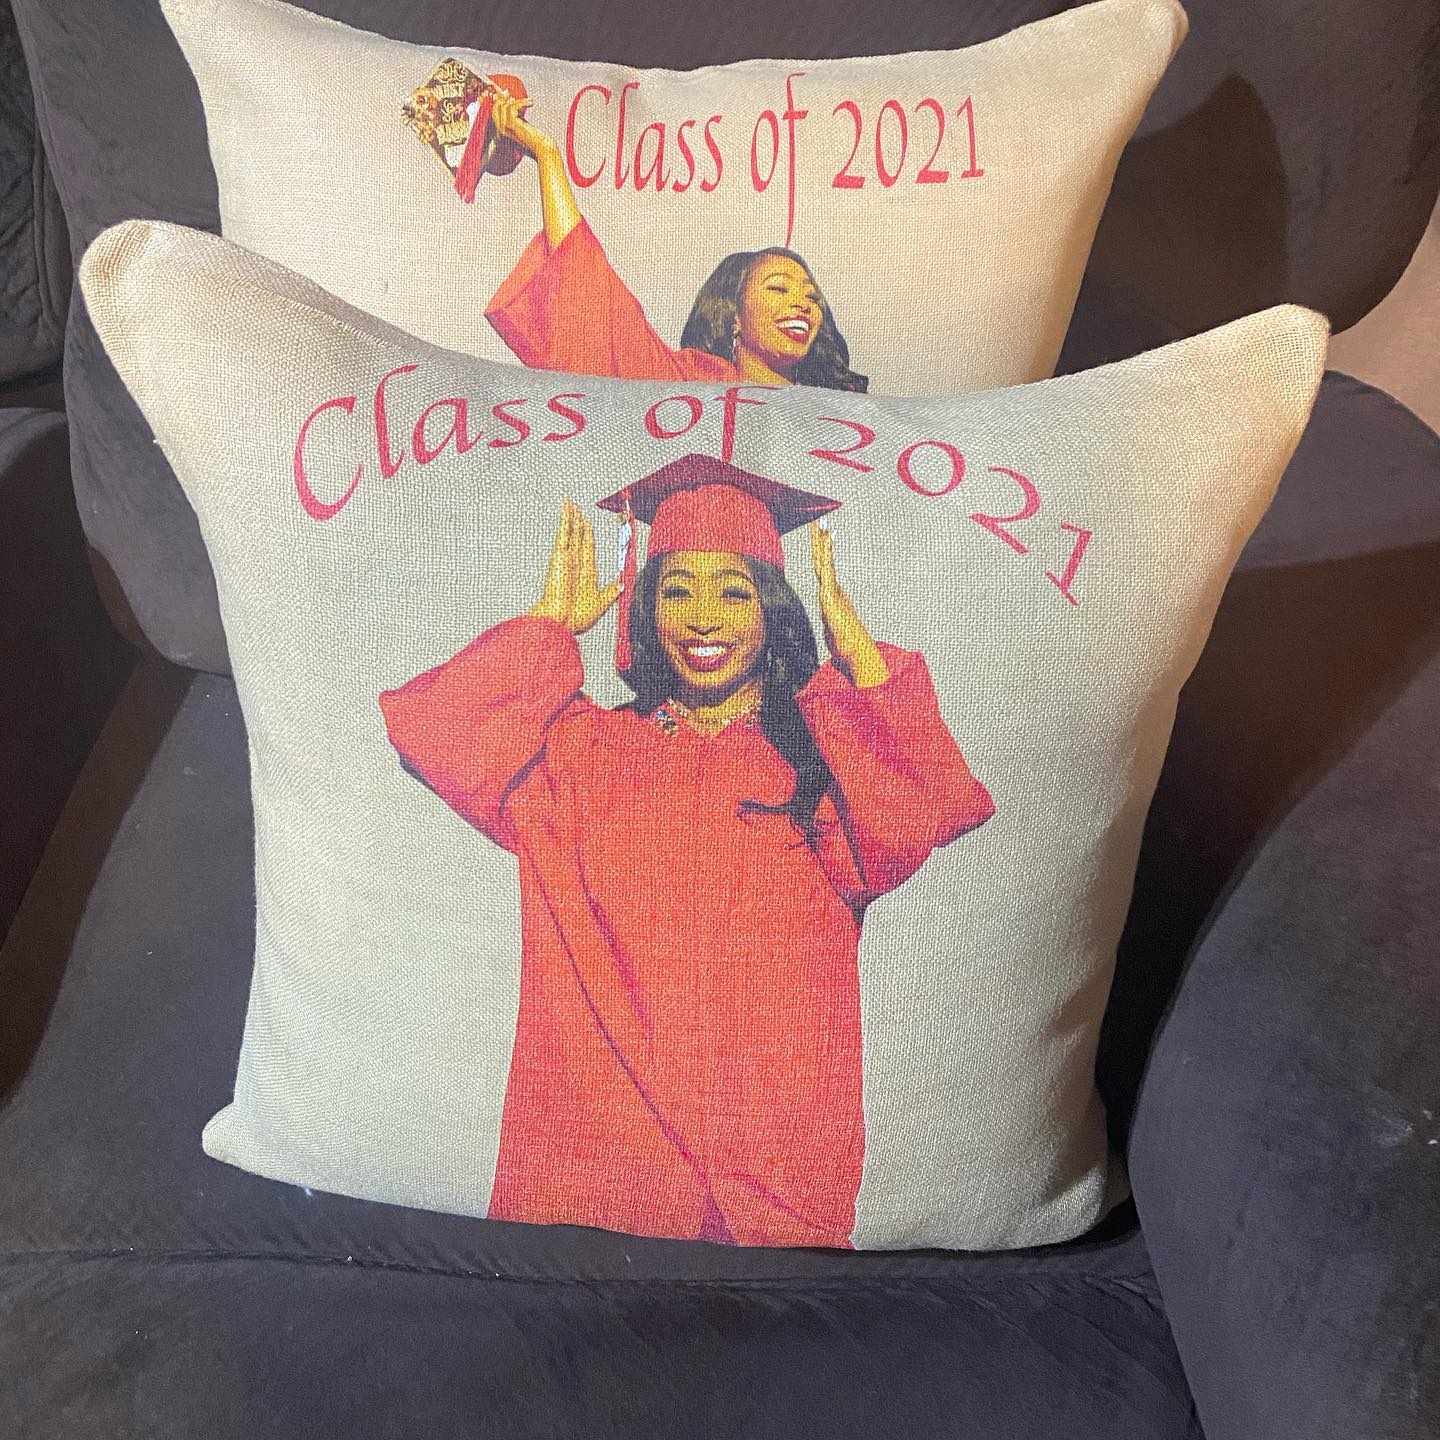 Two pillows that have custom pictures of a woman graduating with the words "Class of 2021" 